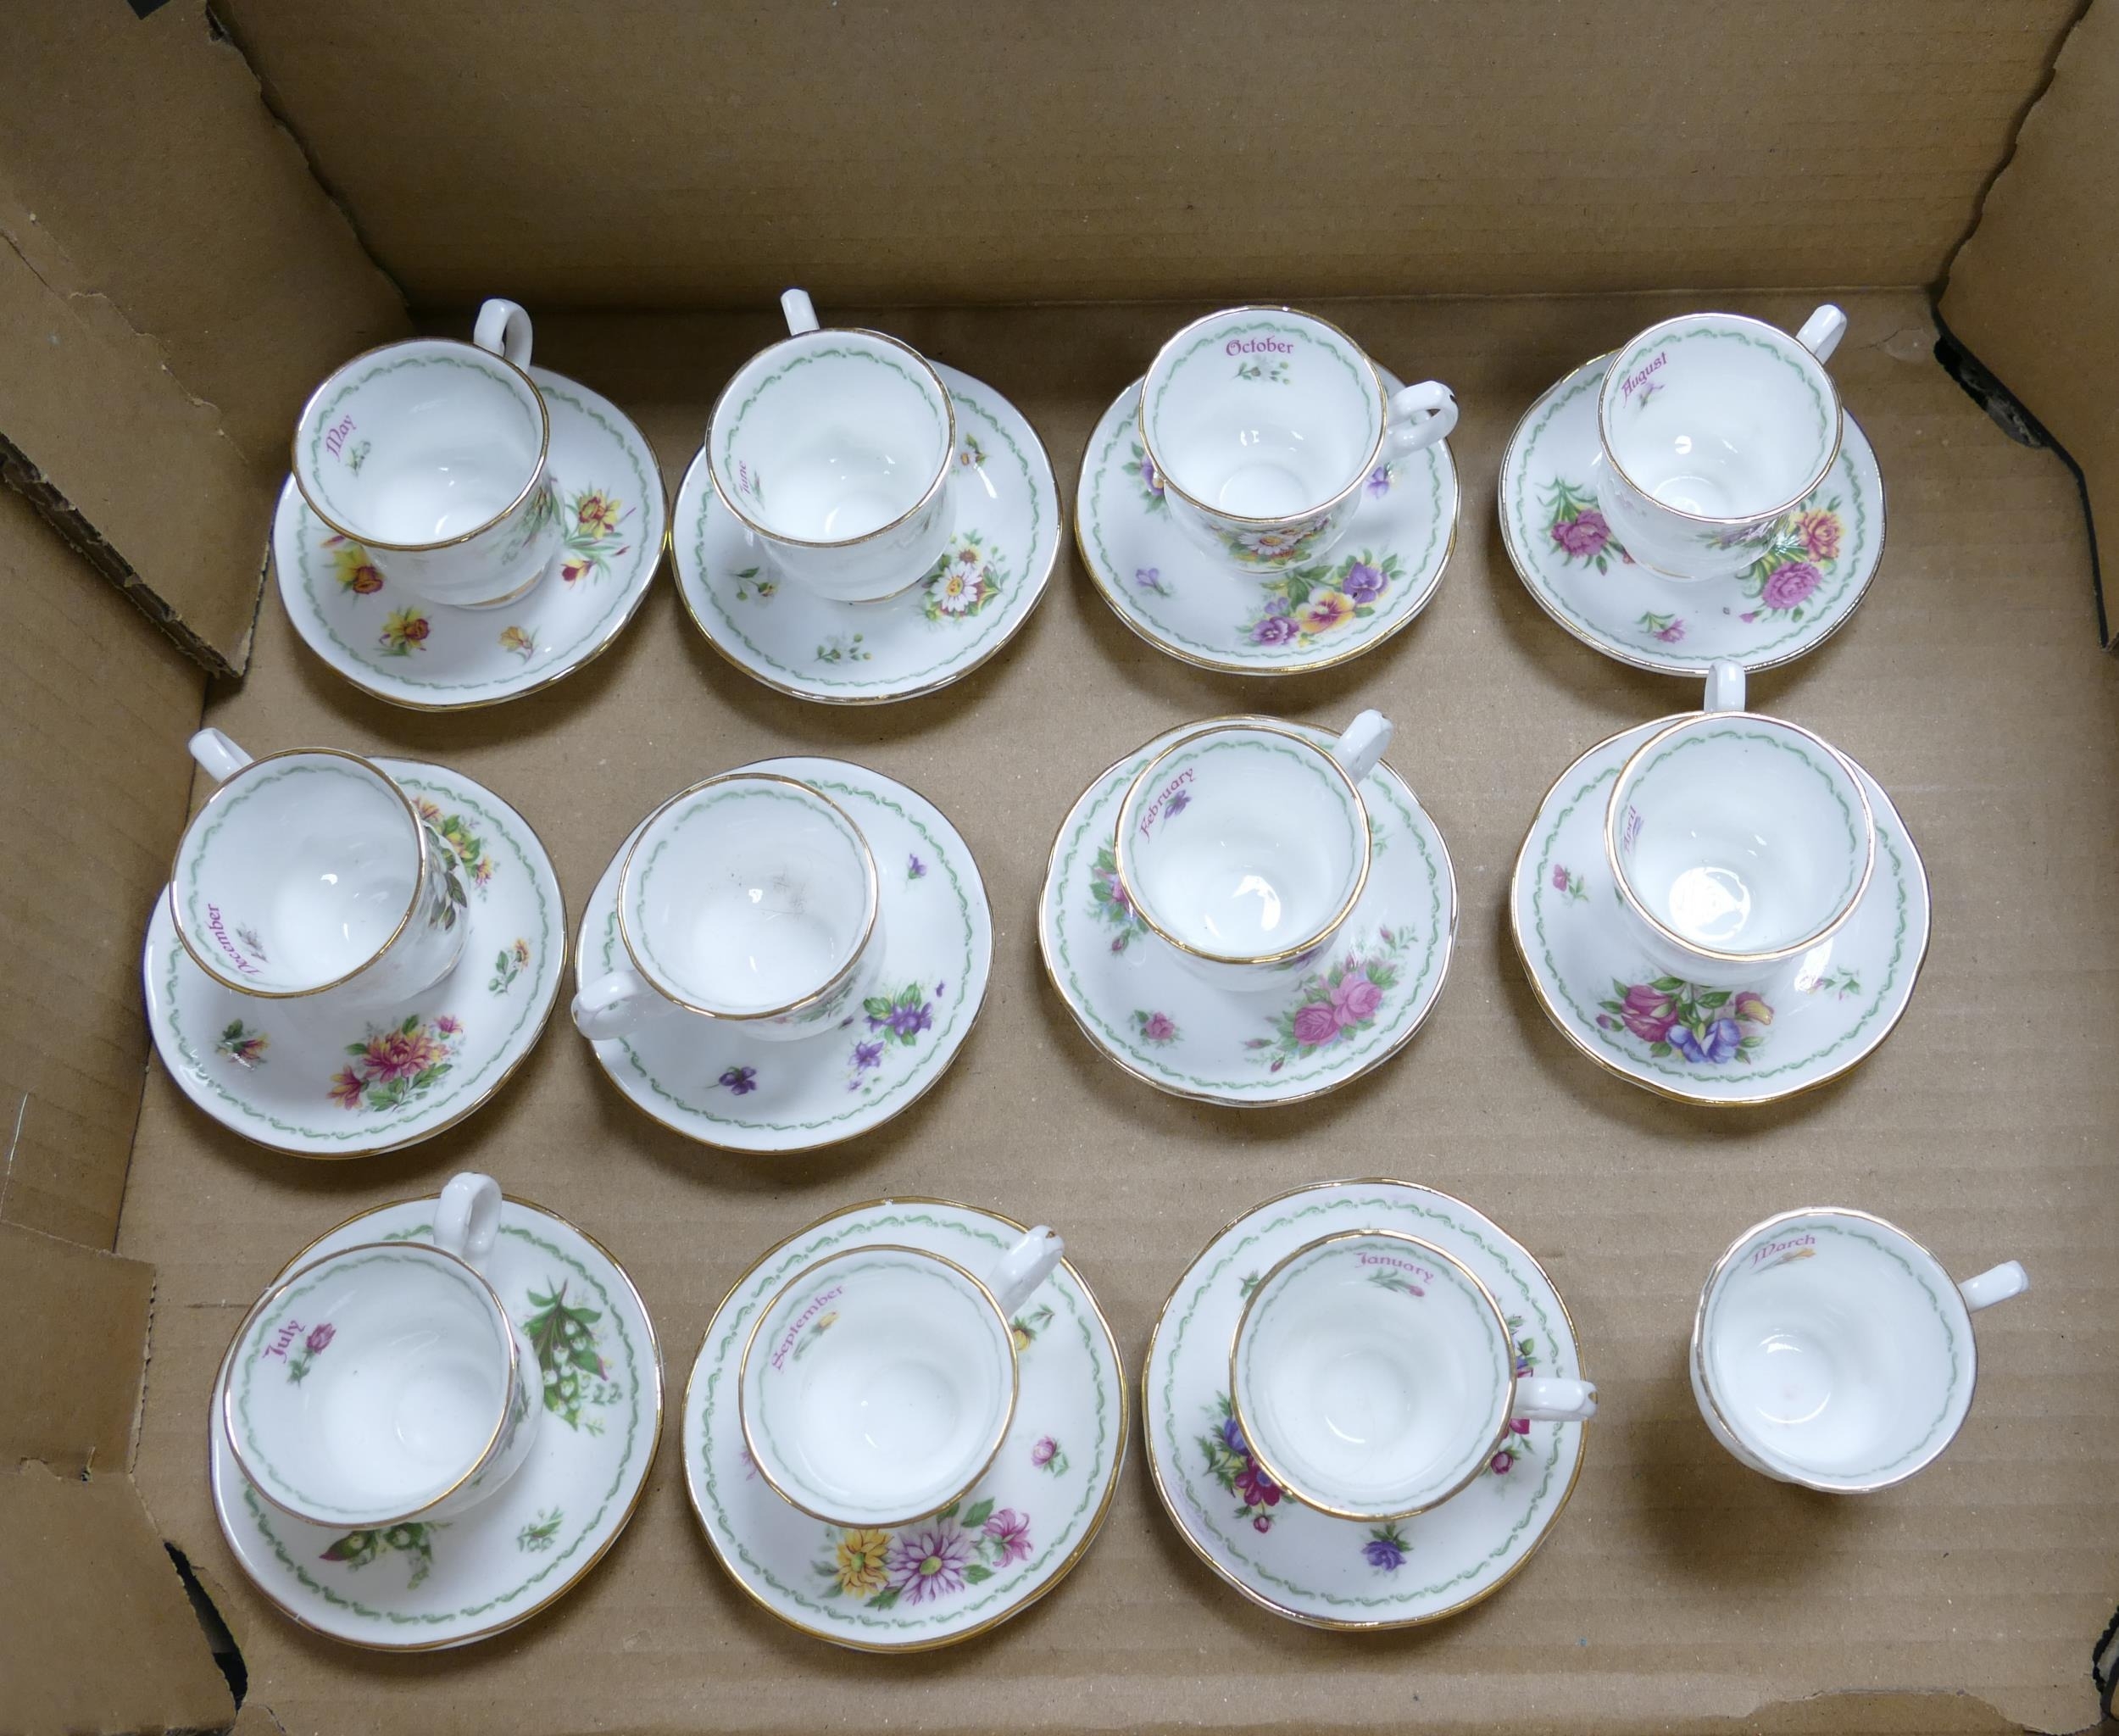 Queens China, A Miniature Set of Twelve Teacups representing the Months of the Year. One Saucer - Image 2 of 2